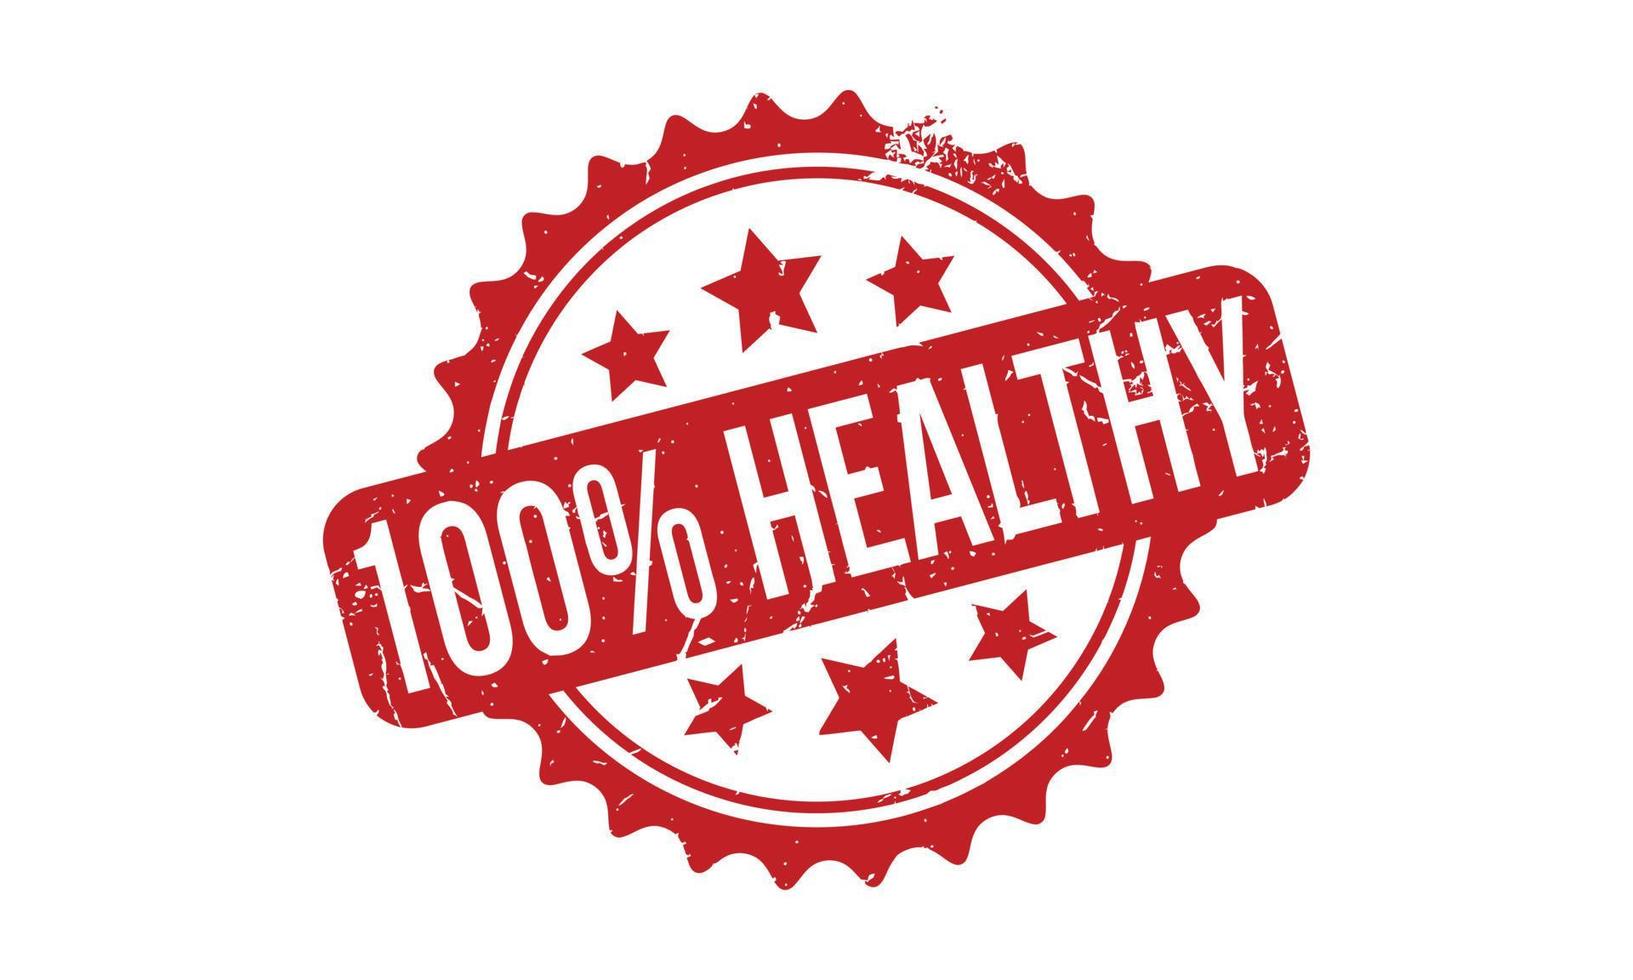 100 Percent Healthy Rubber Stamp. Red 100 Percent Healthy Rubber Grunge Stamp Seal Vector Illustration